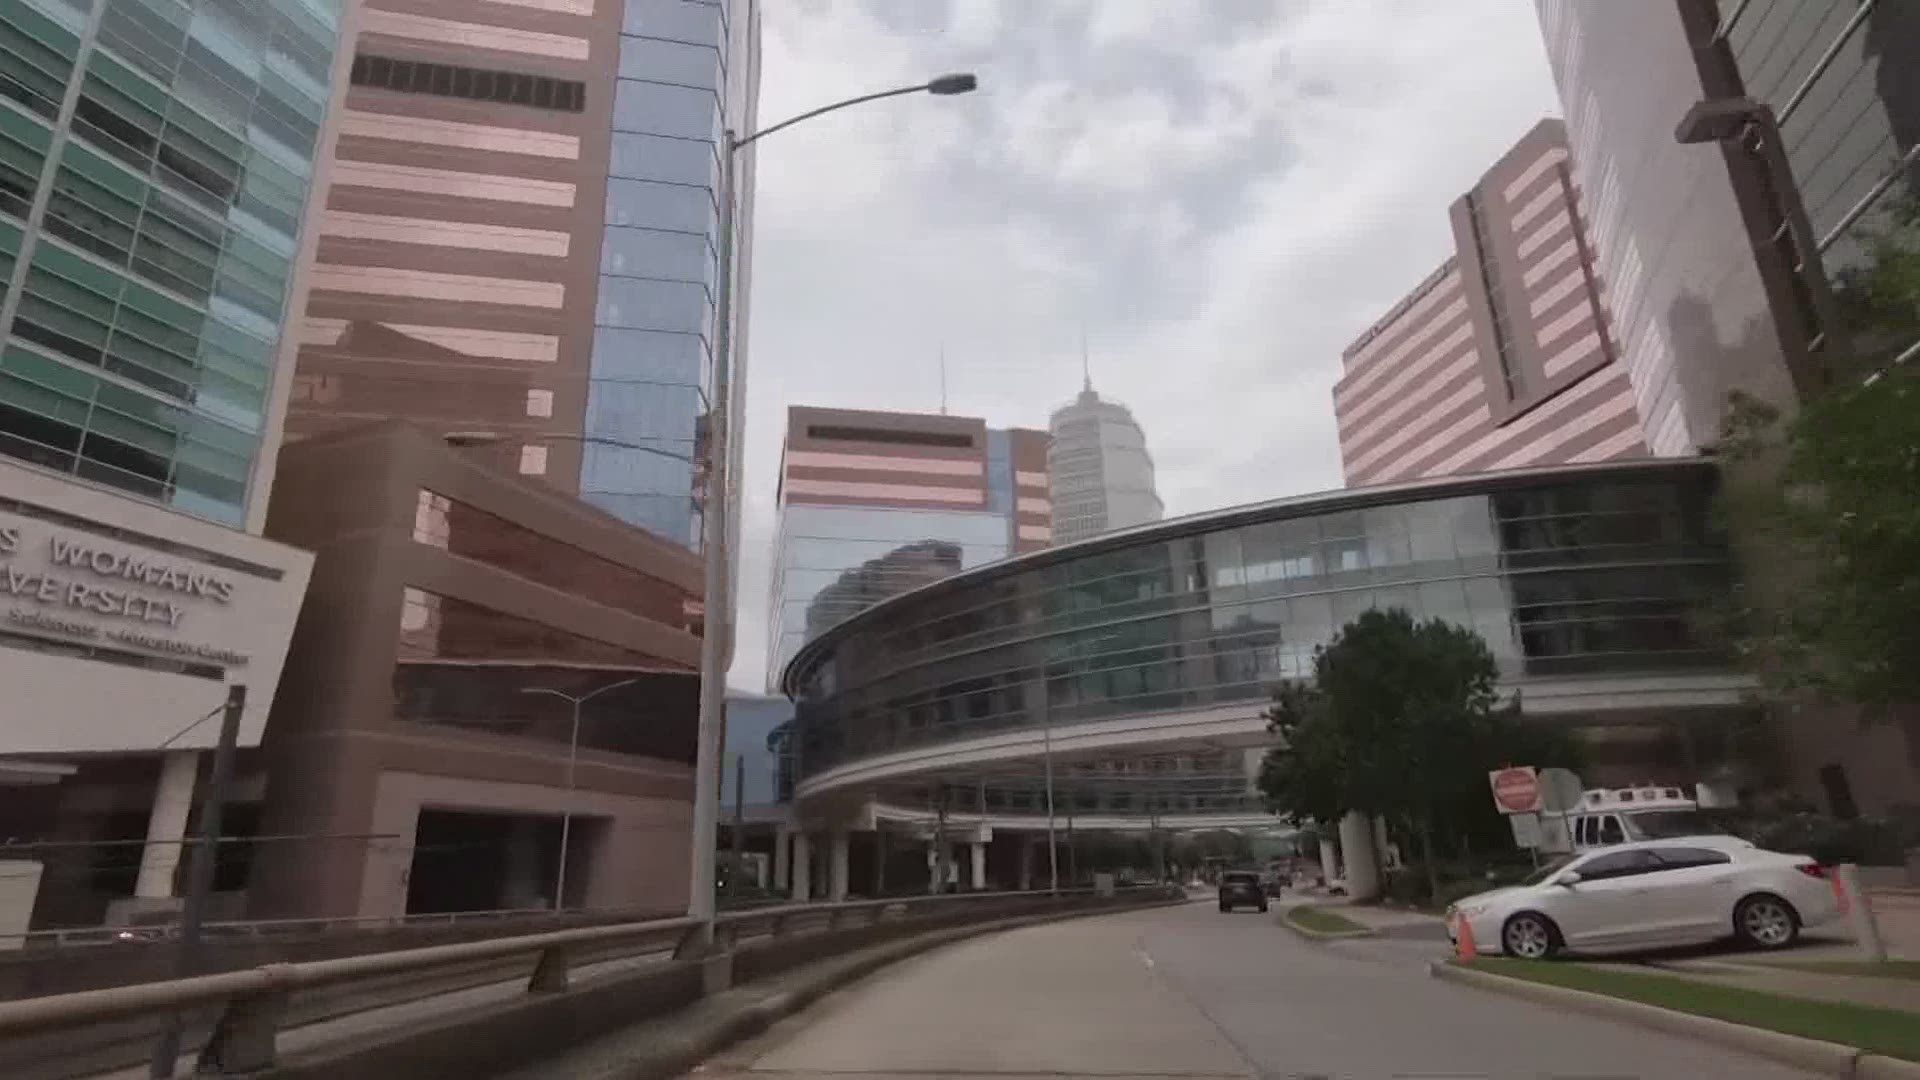 Both Houston Methodist and Memorial Hermann are reporting big jumps in hospitalizations since the 4th of July holiday.